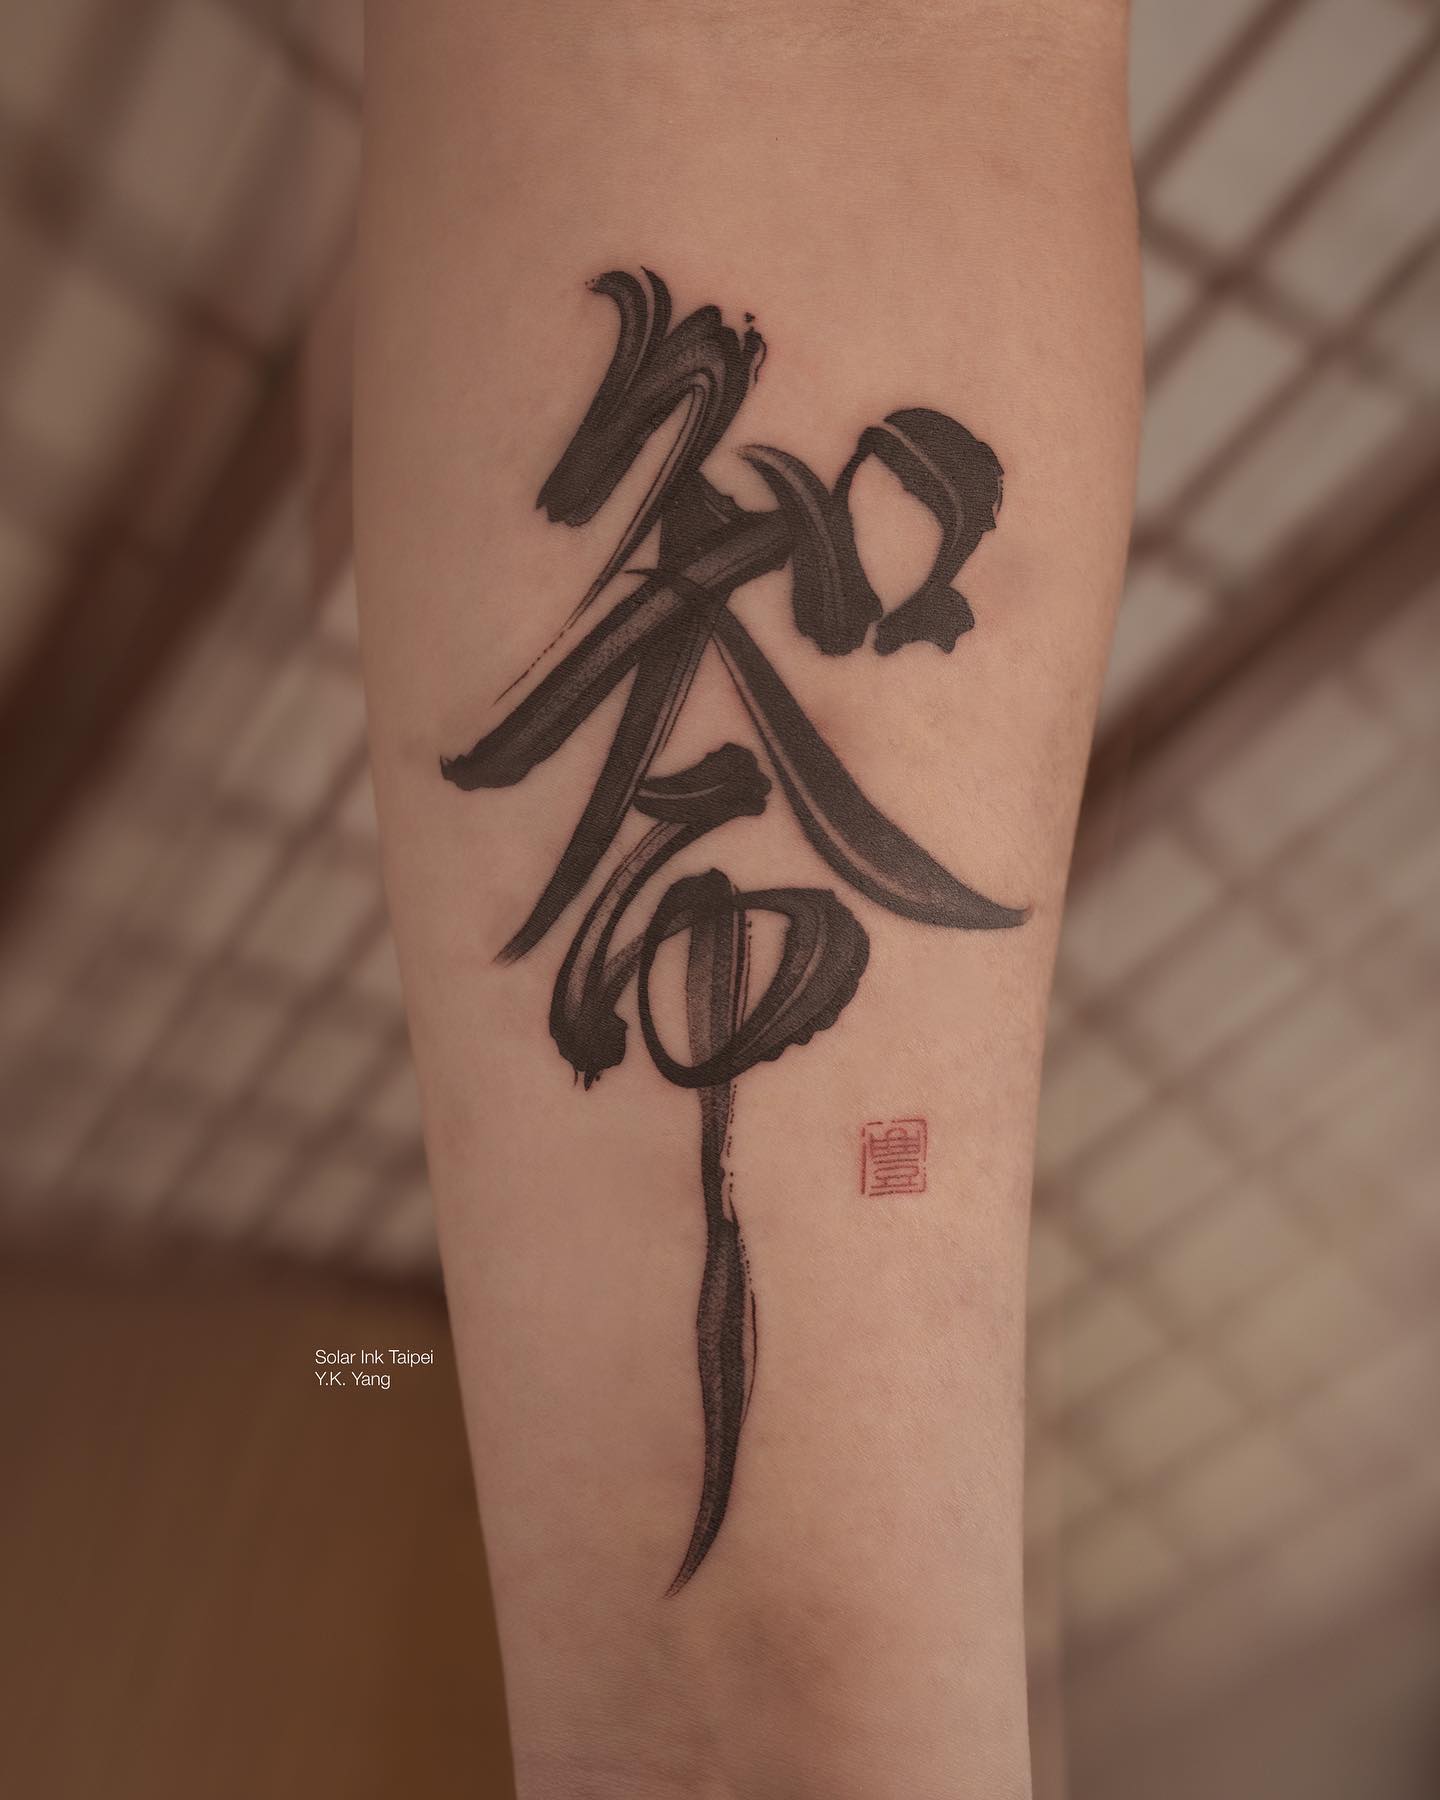 Single Chinese Letter Tattoo on Arm